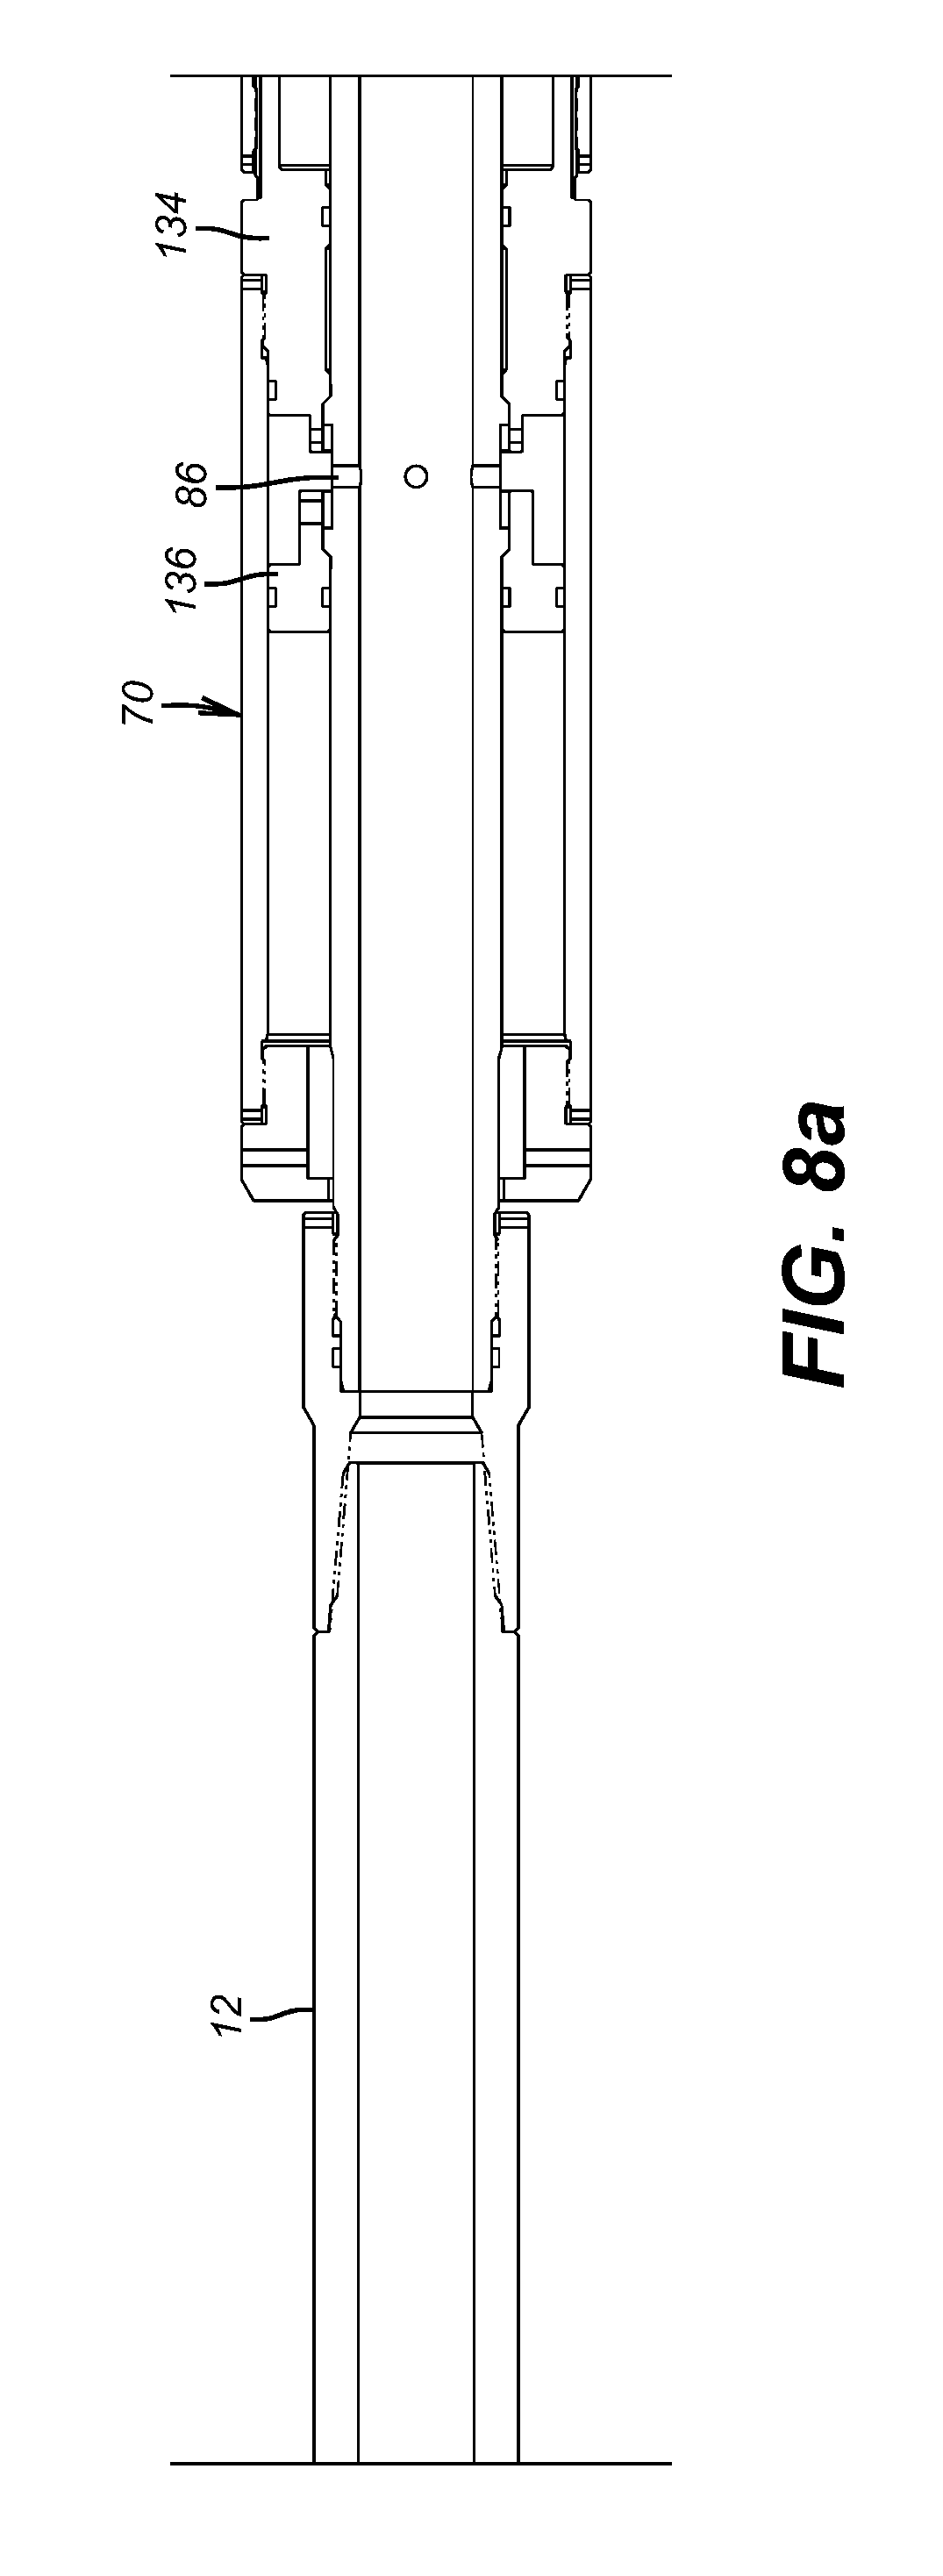 Fracturing and Gravel Packing Tool with Shifting Ability between Squeeze and Circulate while Supporting an Inner String Assembly in a Single Position